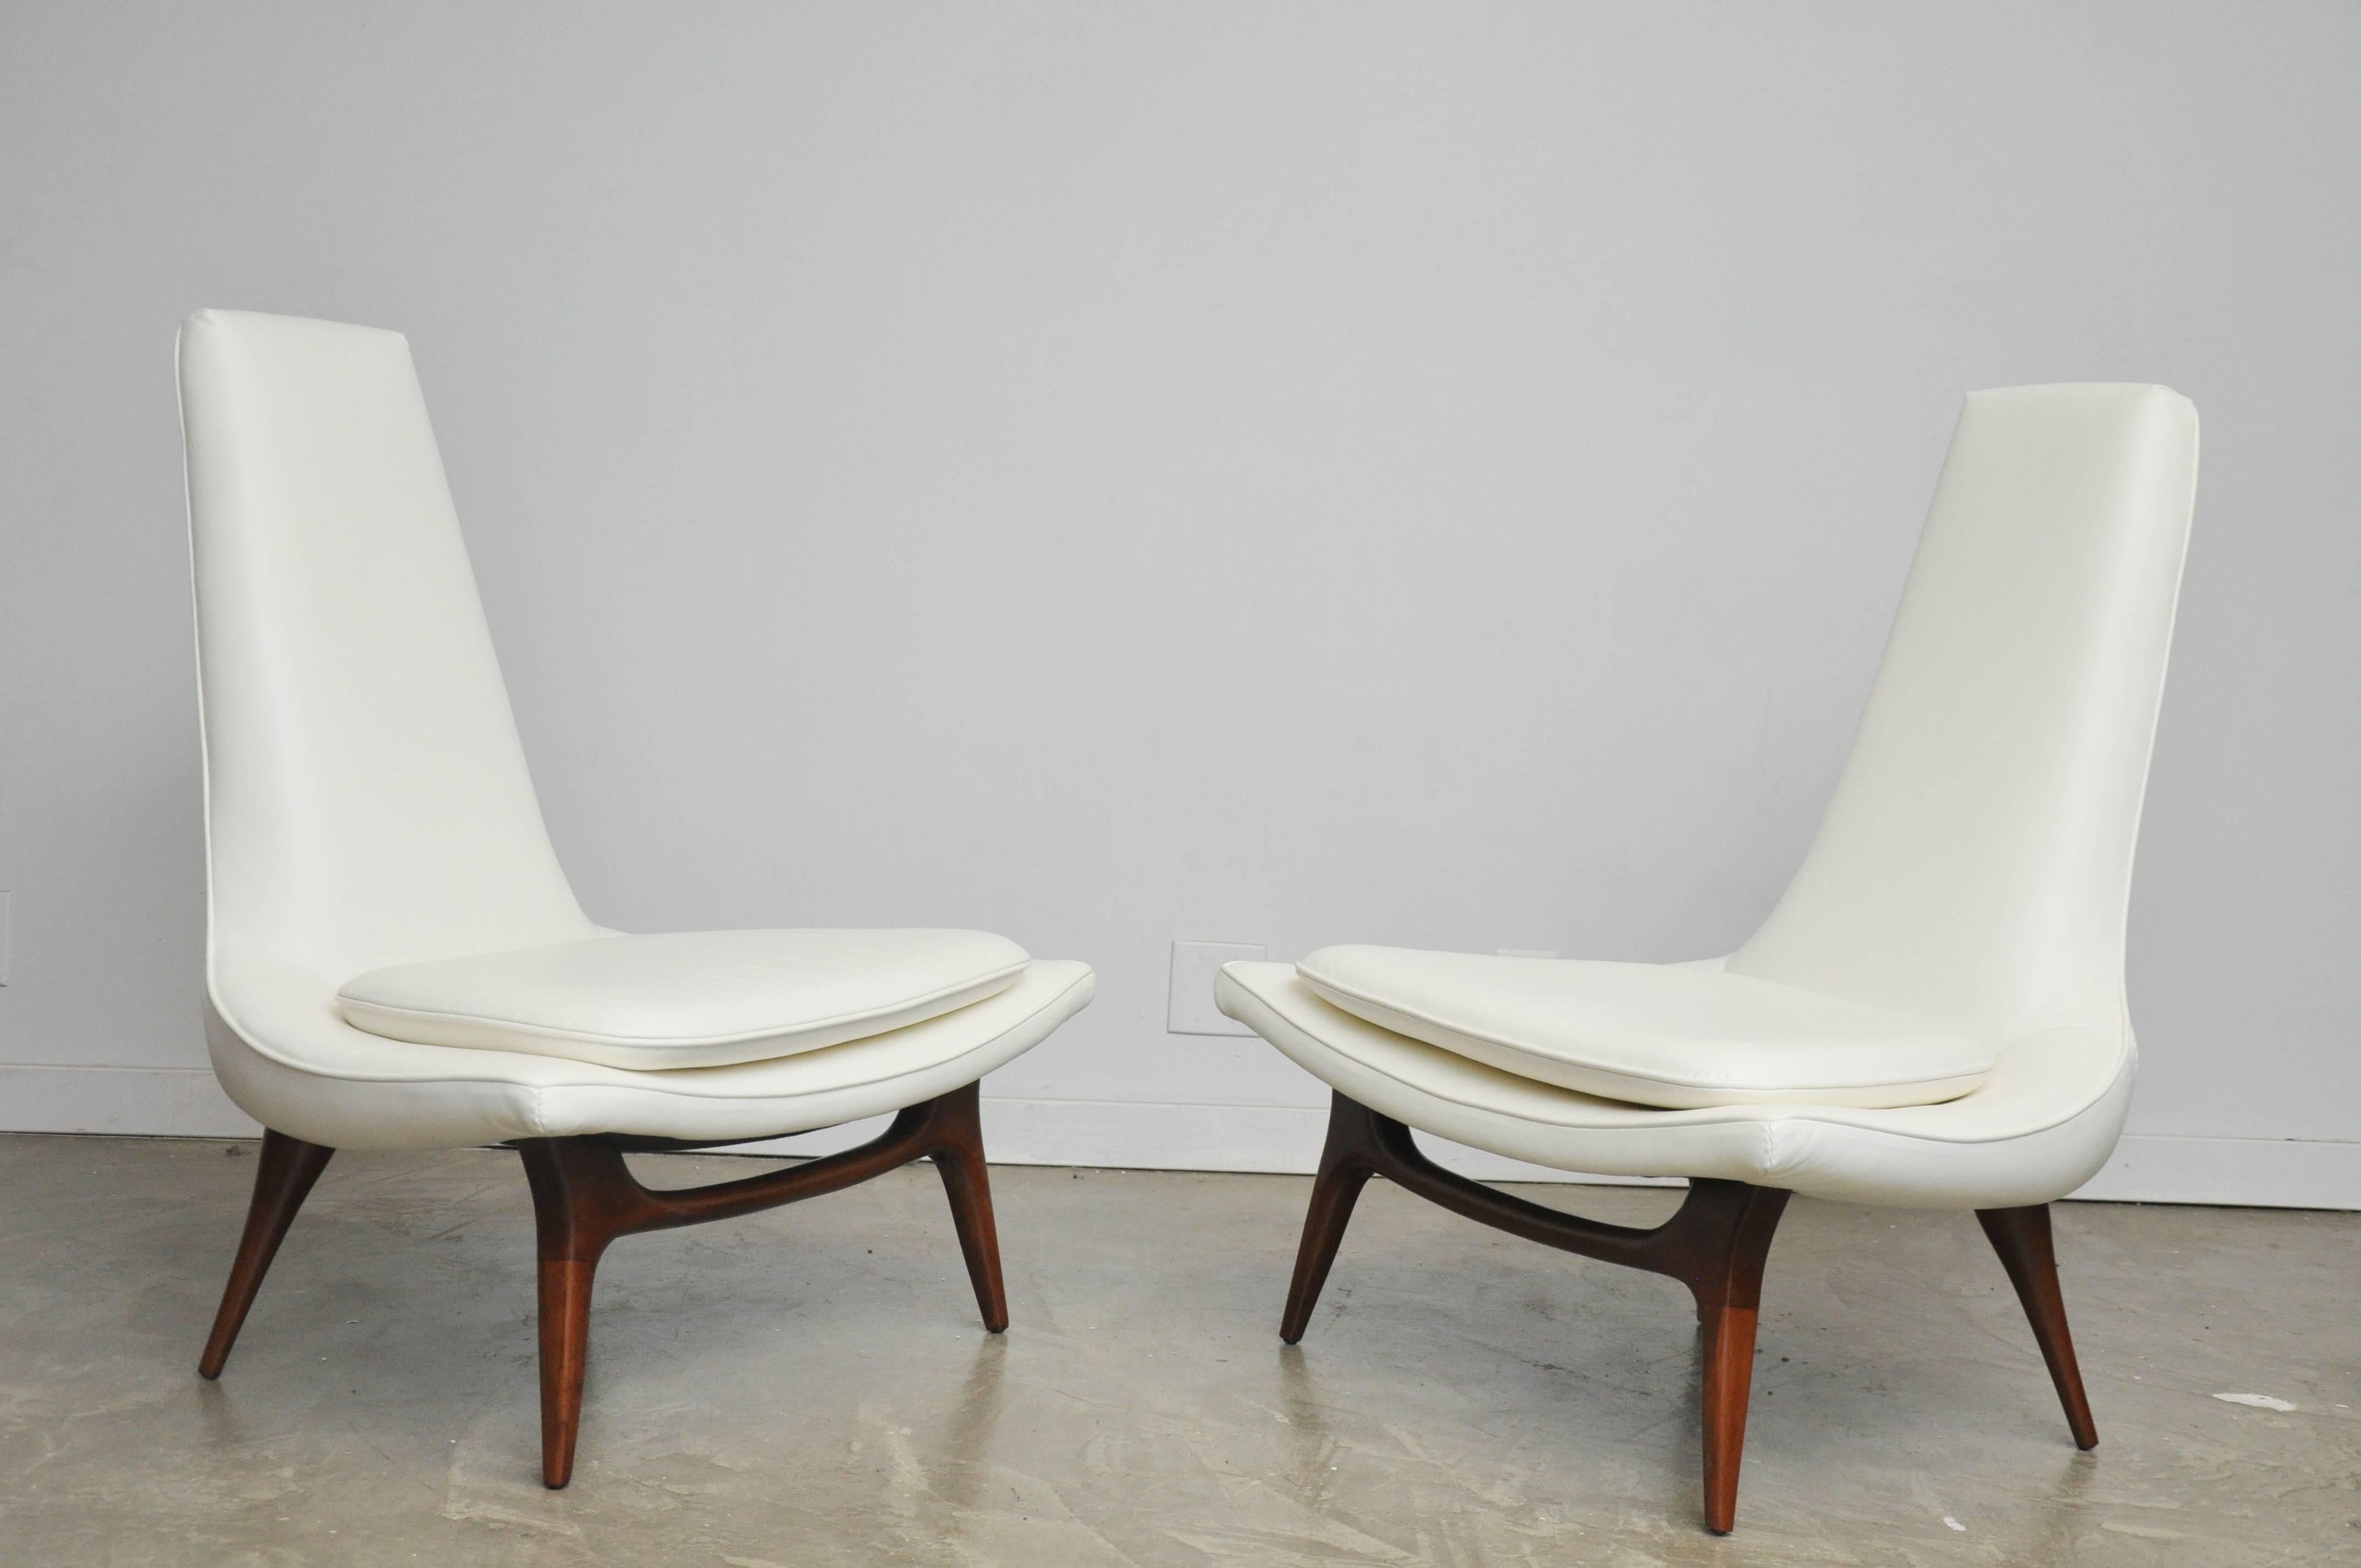 Pair of high back lounge chairs by Karpen of Ca. New leather upholstery over refinished legs.